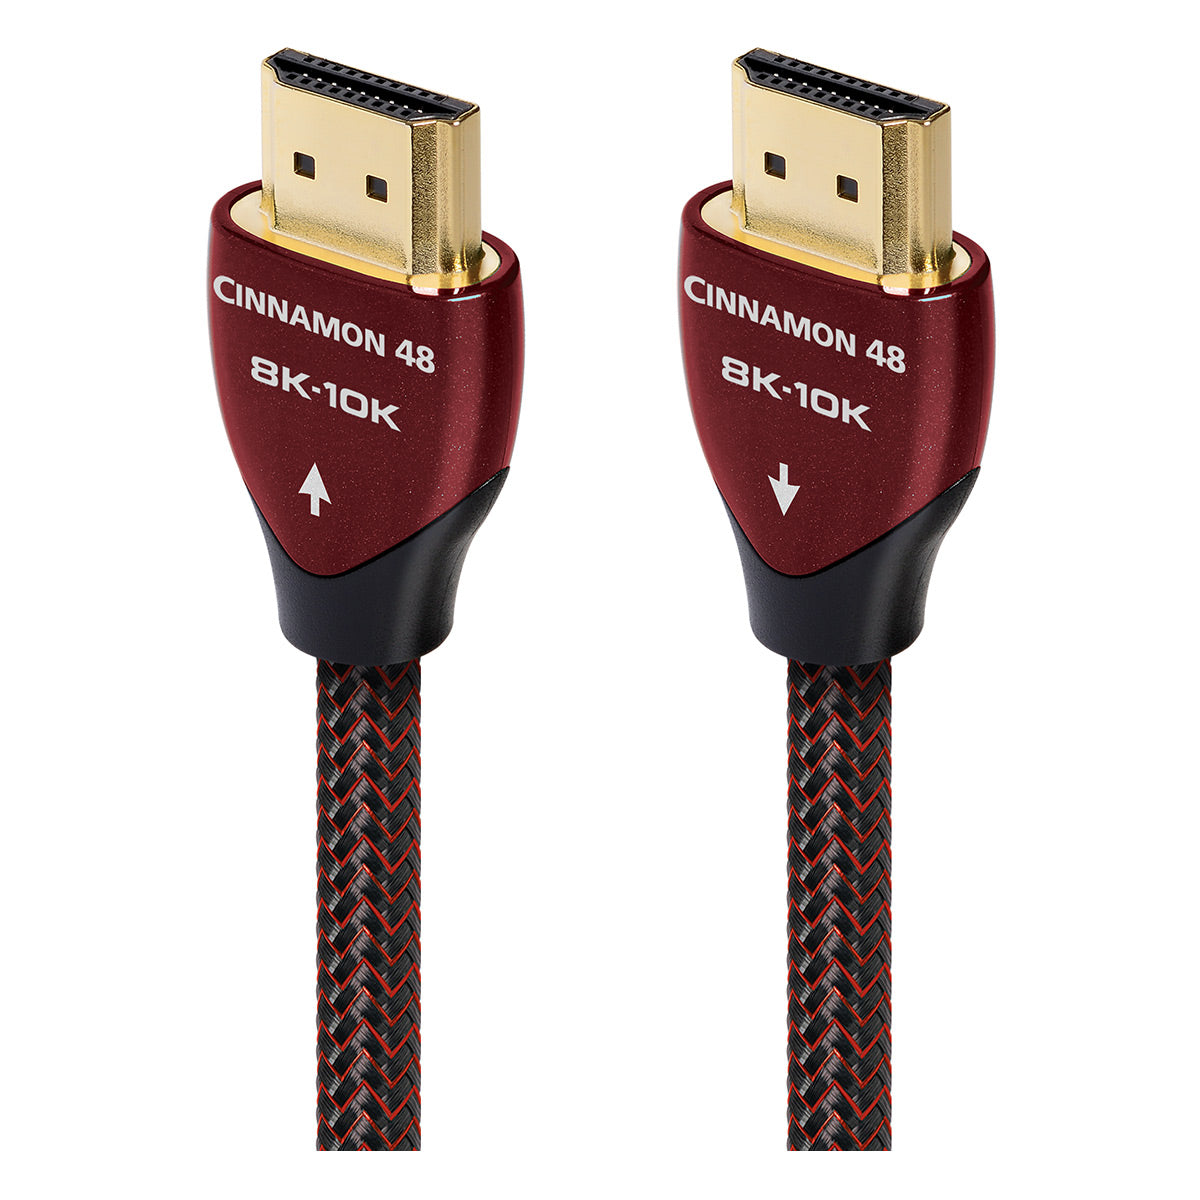 Photos - Cable (video, audio, USB) AudioQuest Cinnamon 48 8K-10K 48Gbps Ultra High Speed HDMI Cable - 16.4 ft 